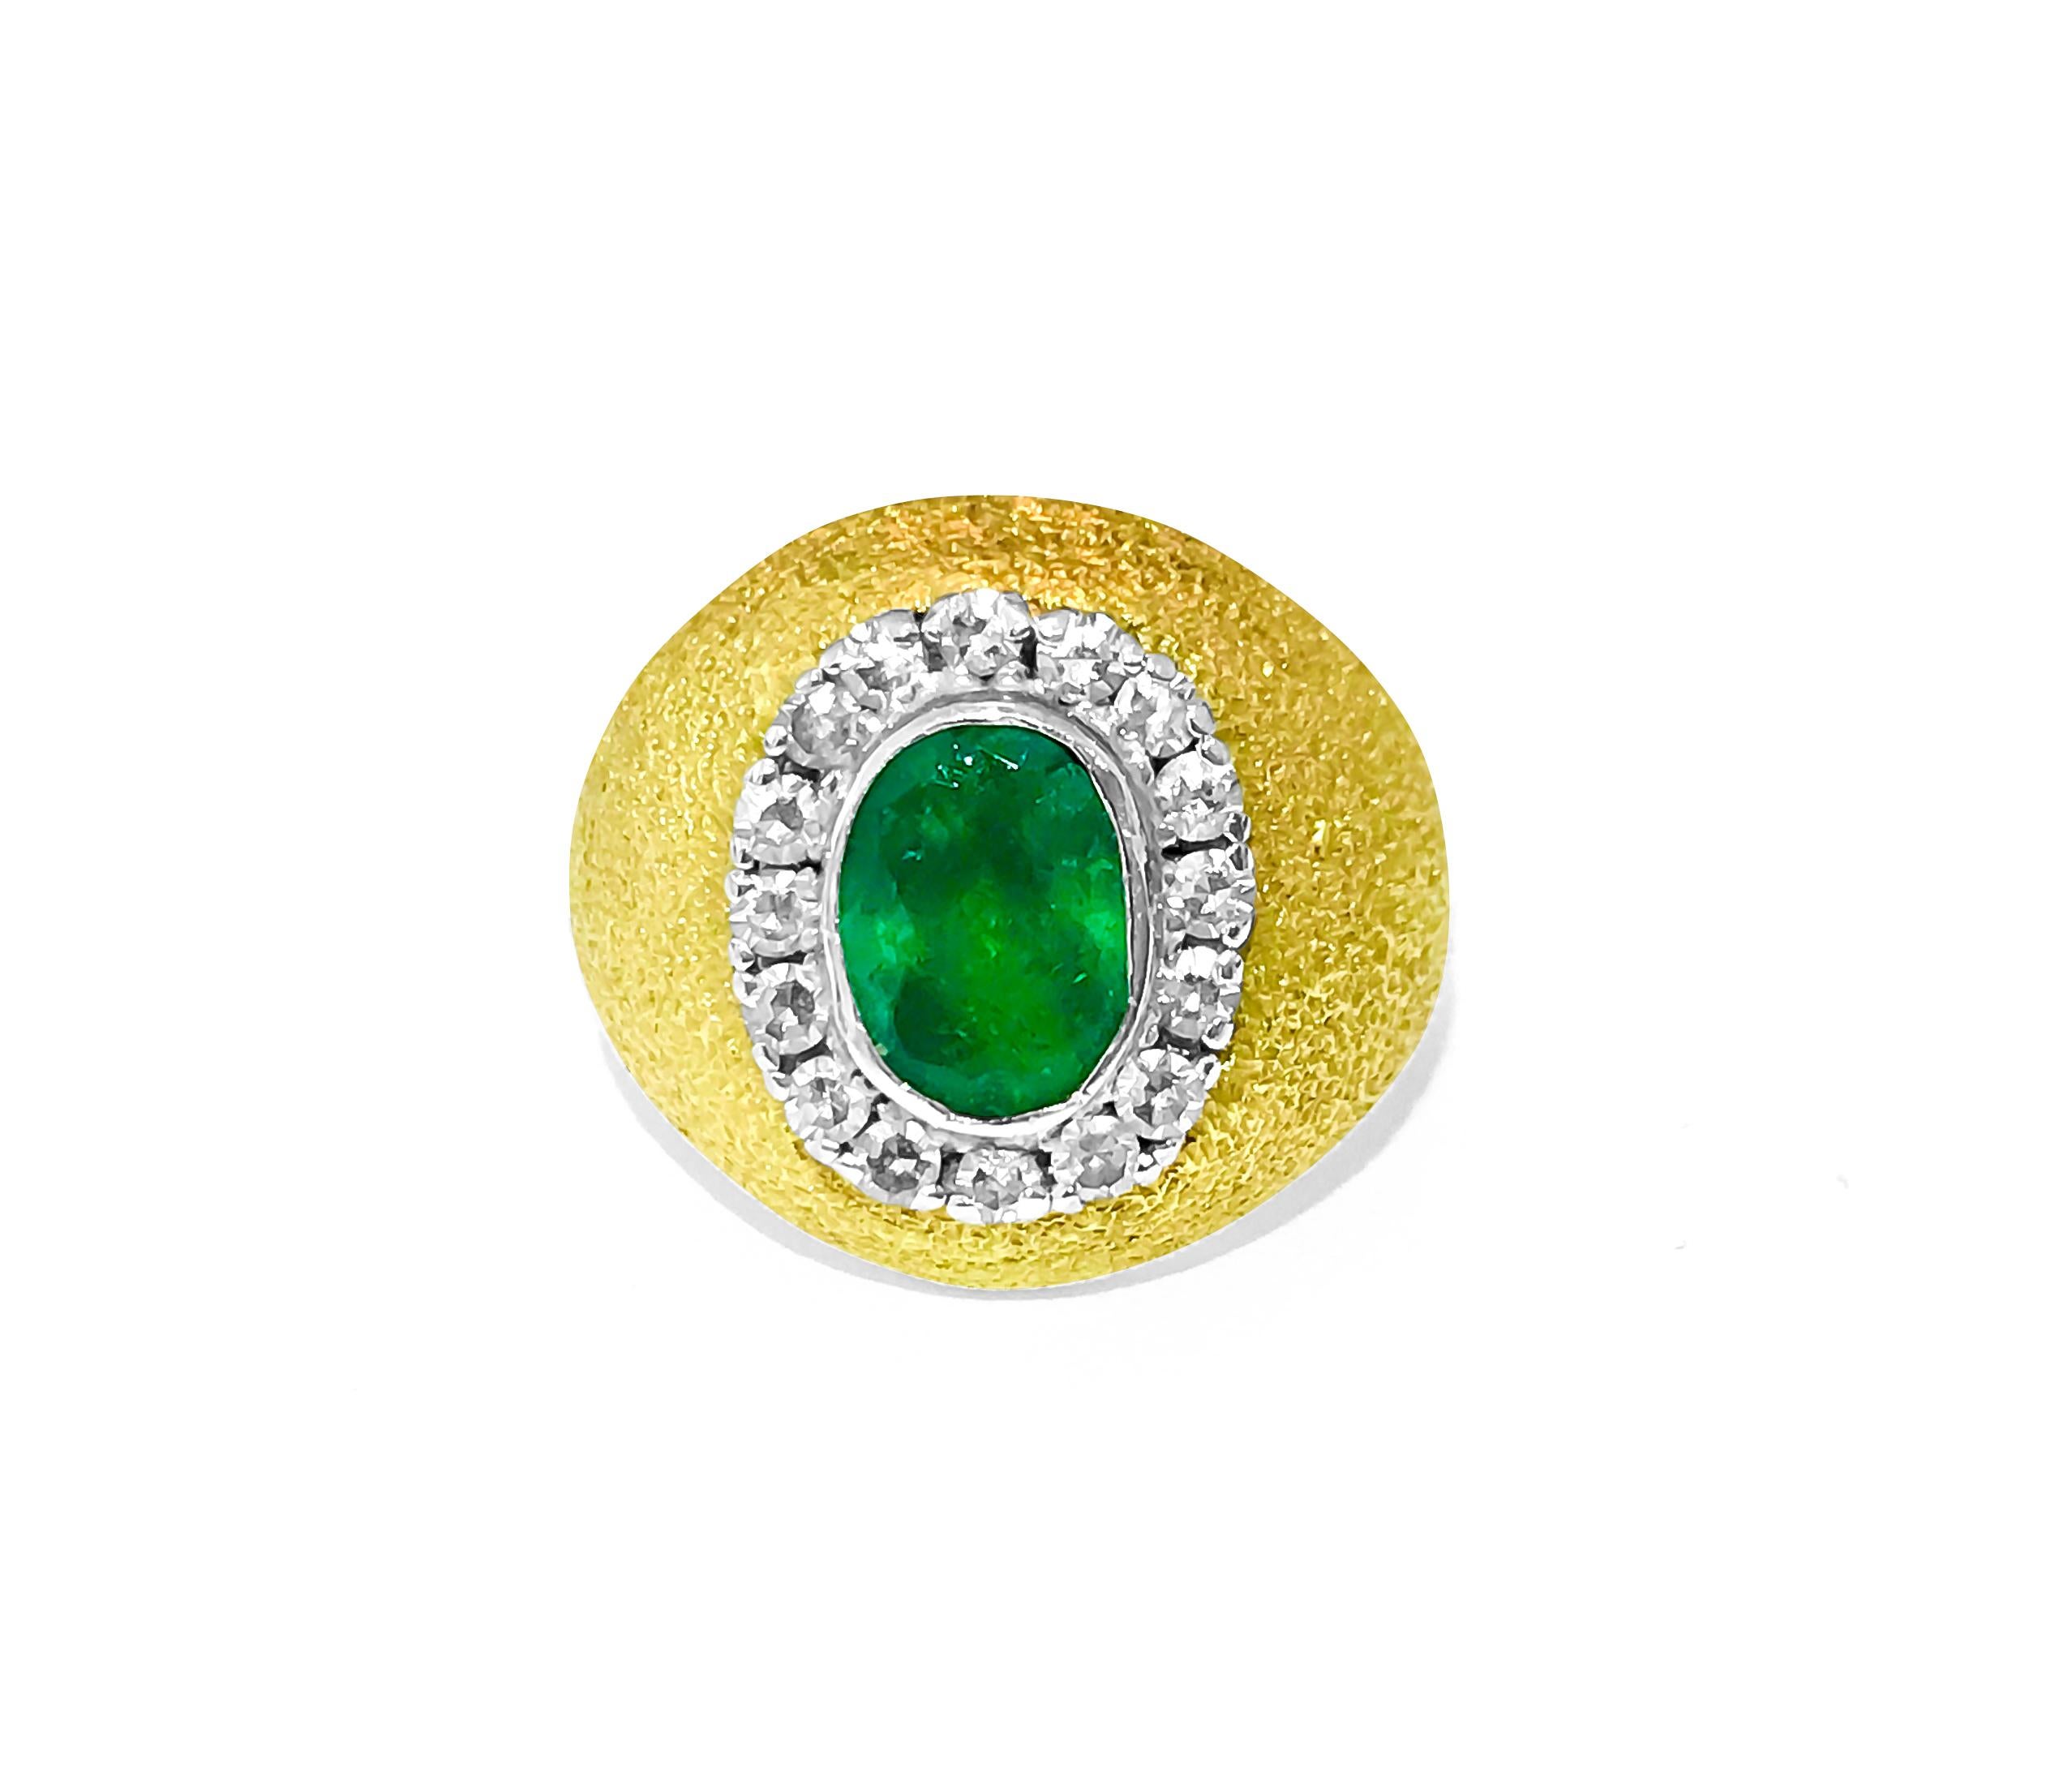 18k Gold Vintage 2.5 ct Emerald And Diamond Ring In Excellent Condition For Sale In Miami, FL